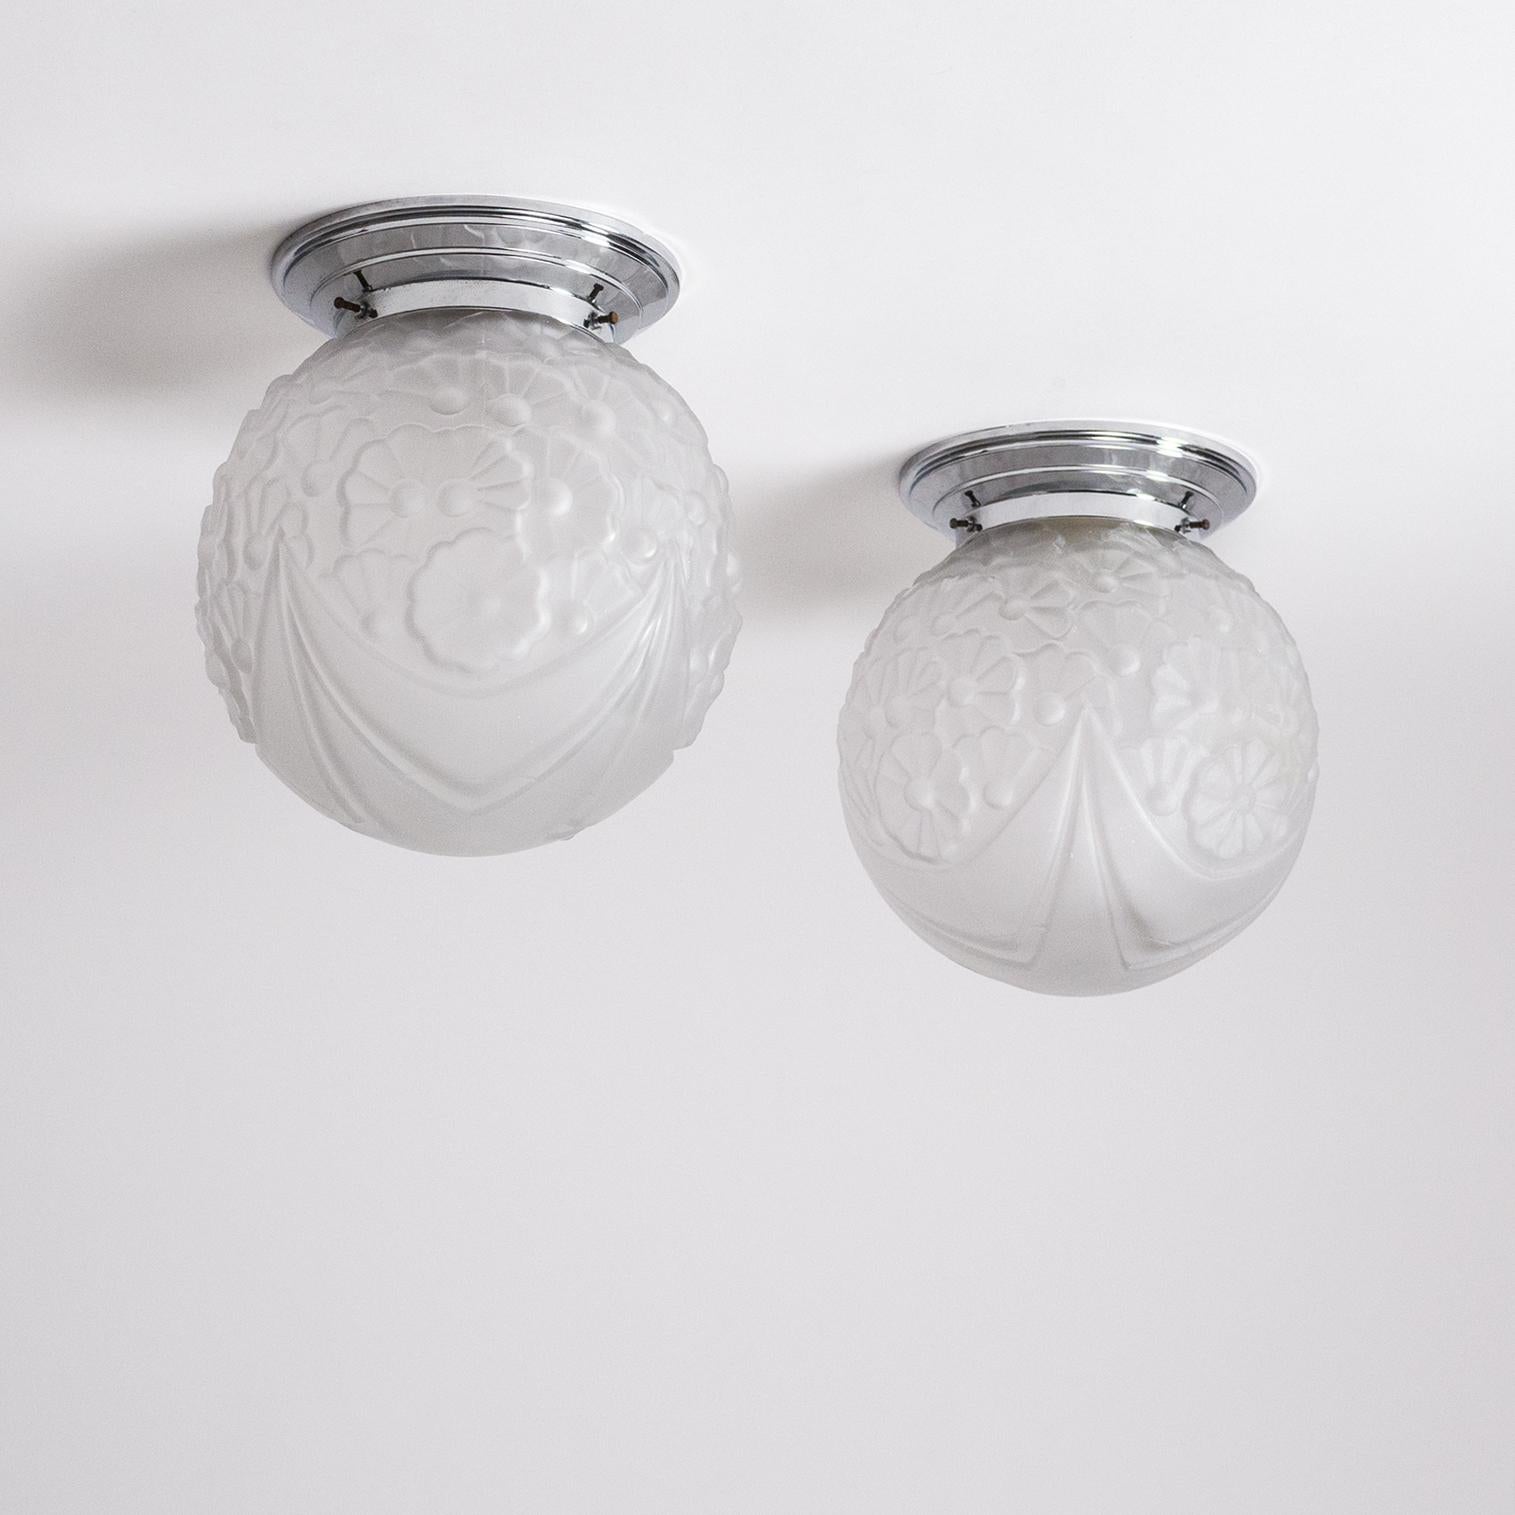 Fine pair of French Art Deco flush mounts from the 1930s. Attached to a chrome base is a thick pressed glass globe with an intricate floral and geometric design and a satin finish. Good original condition with minor wear to the chrome and a chip on